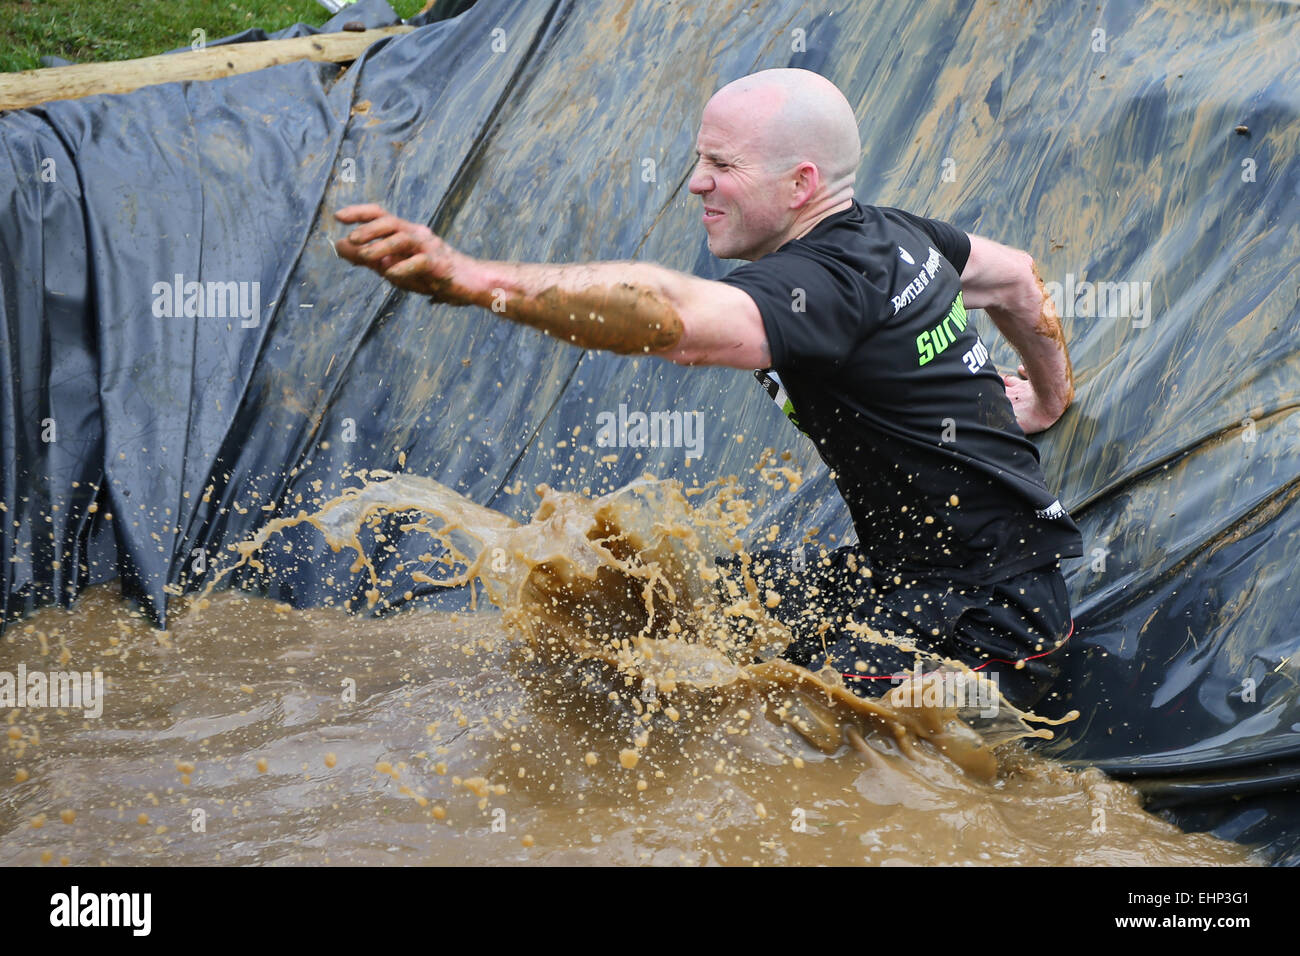 A competitor taking part in The Battle of Lansdown Obstacle Race. Stock Photo